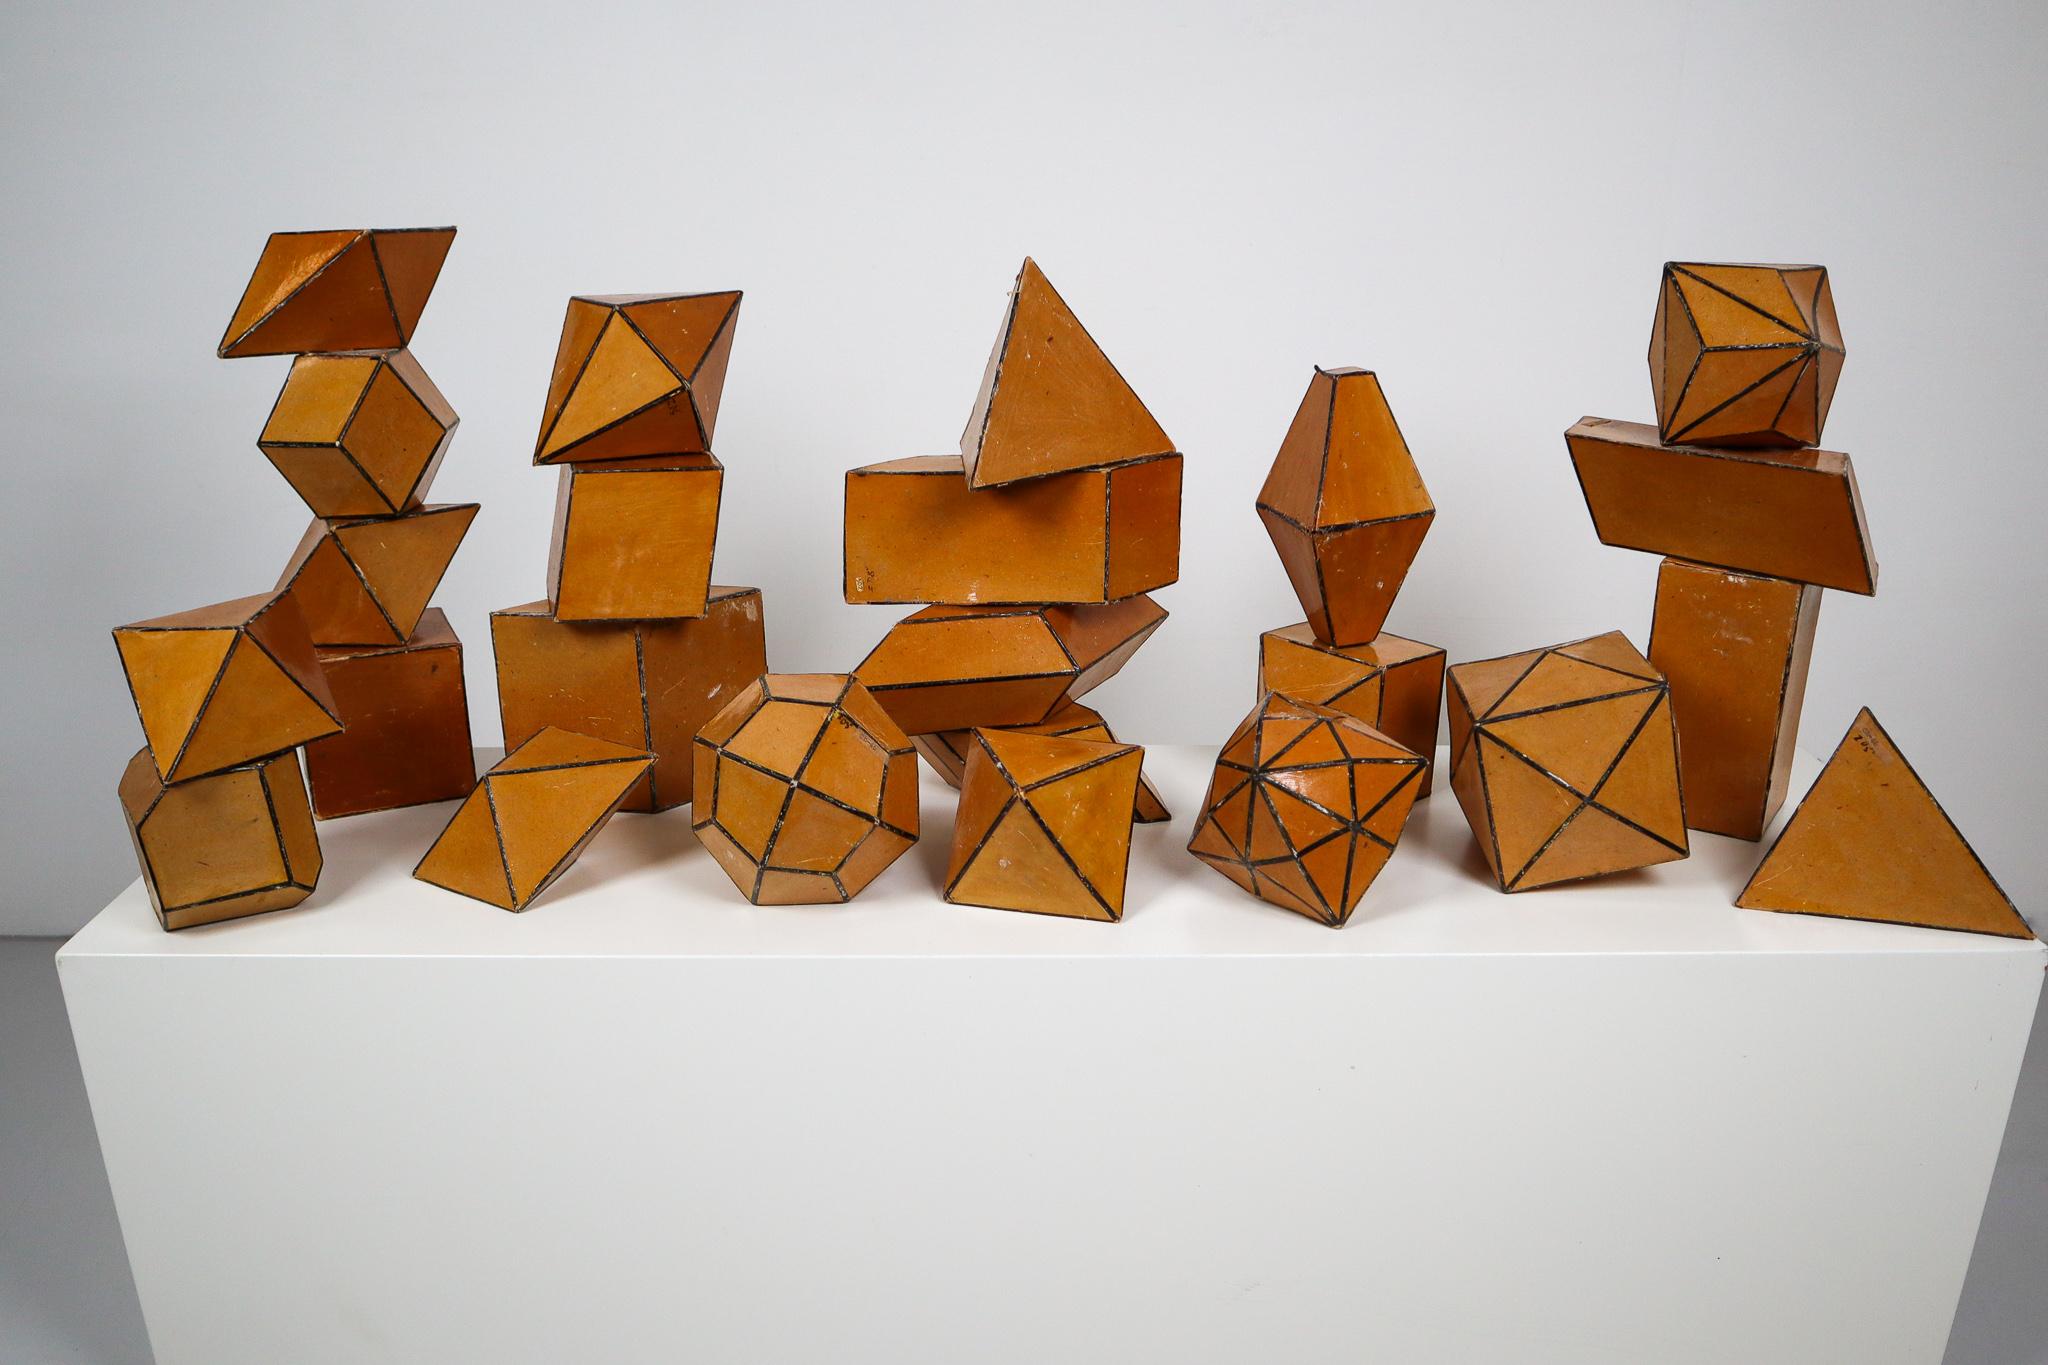 Set of 24 early 20th century cardboard crystal models with black edges. These crystal models used to be used as teaching material at school, to show students the difference in crystal shapes.
Crystals are commonly recognized by their shape,